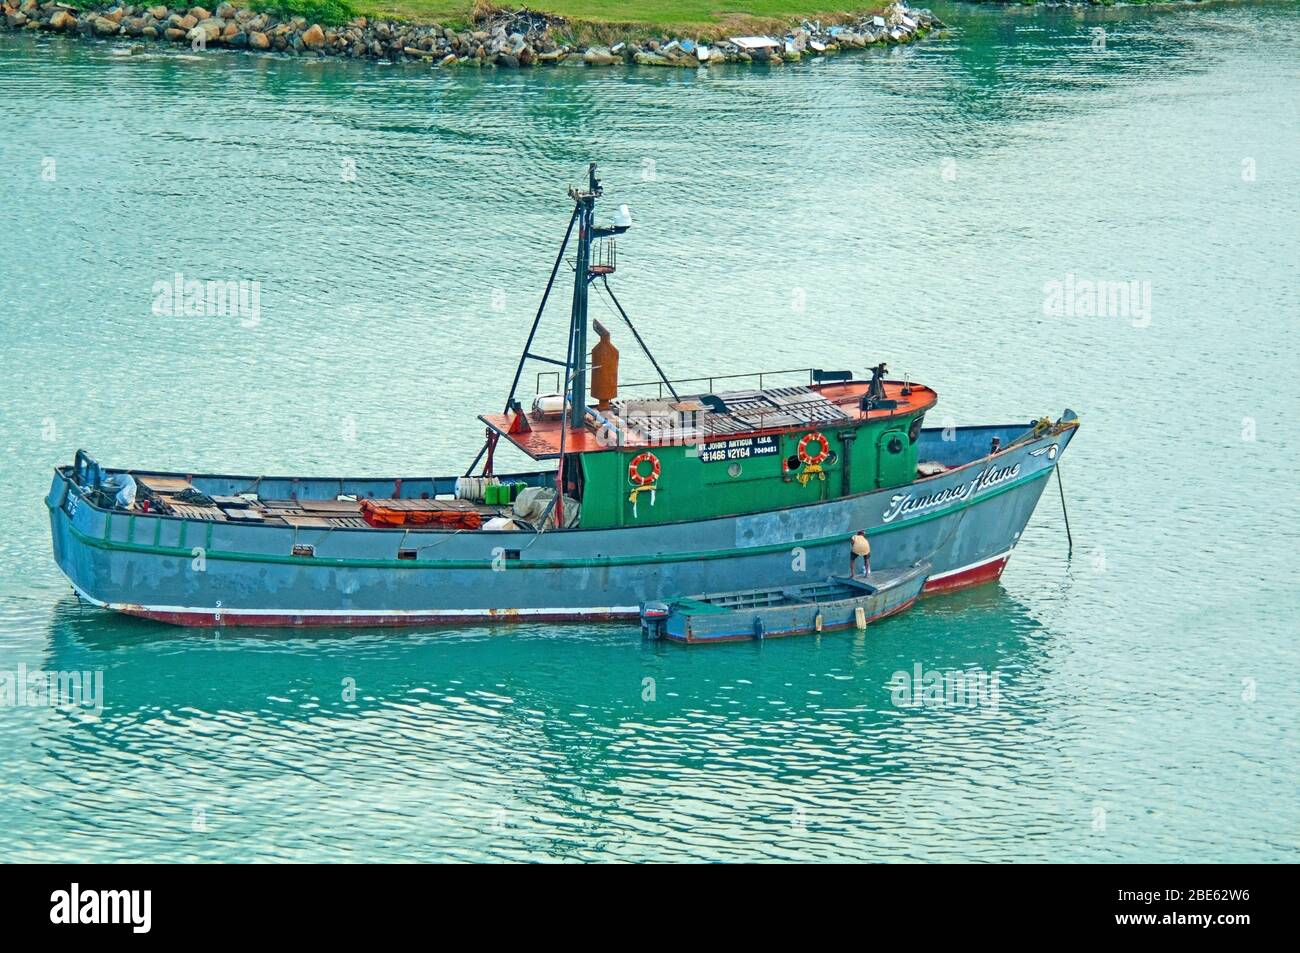 Antigua, St Johns Harbour, Caribbean, West Indies, Fishing Boat Stock Photo